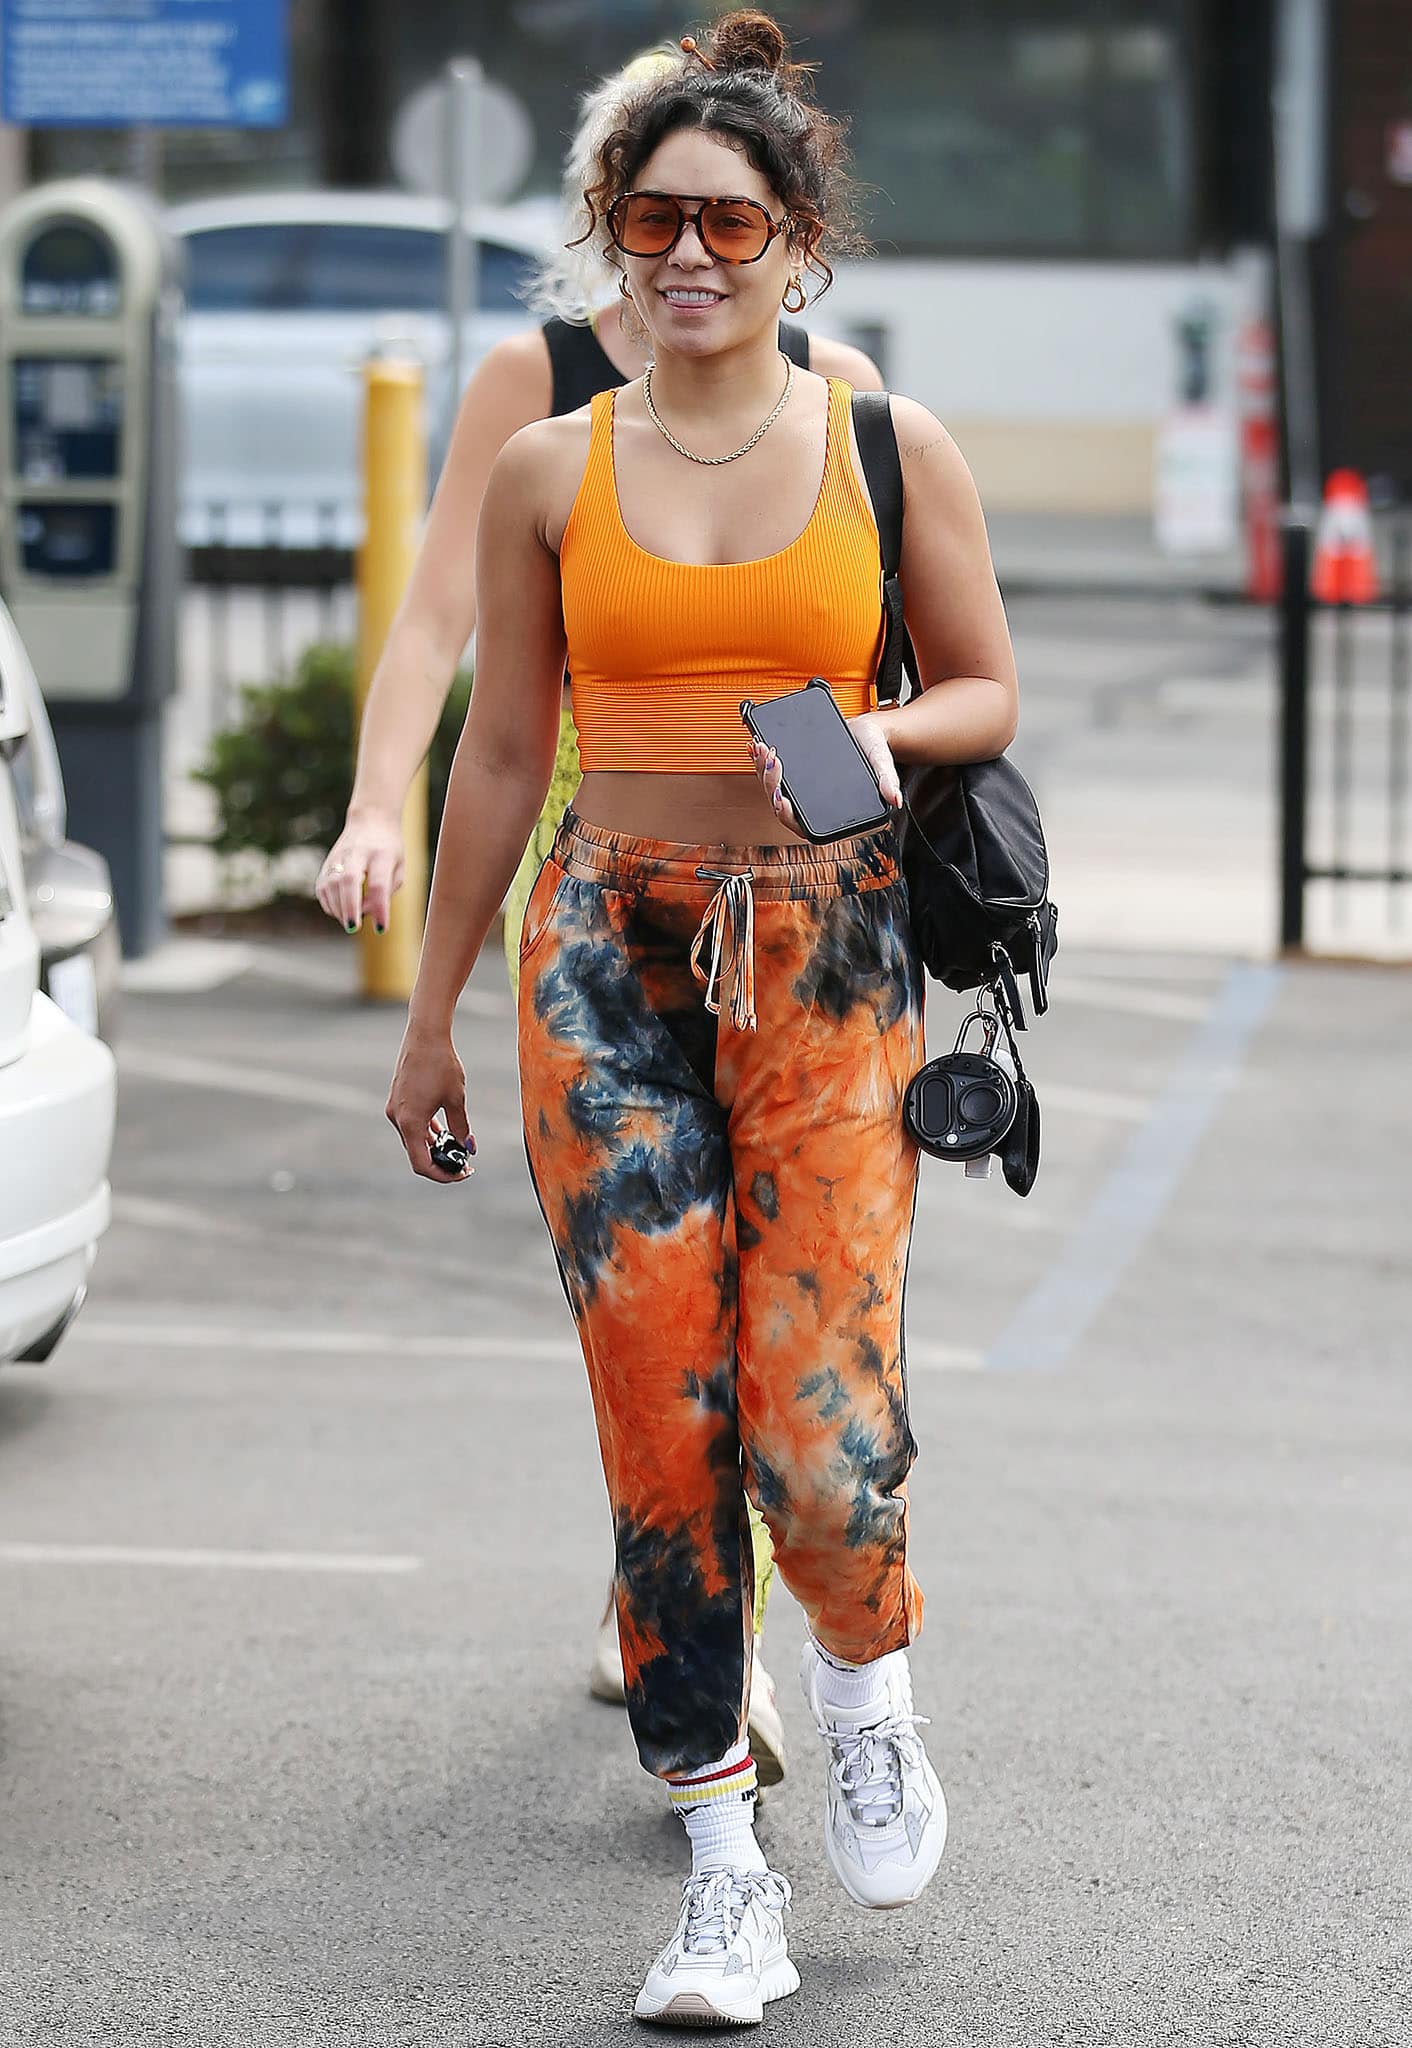 Braless Vanessa Hudgens flashes abs and cleavage in orange sports bra and orange tie-dye joggers